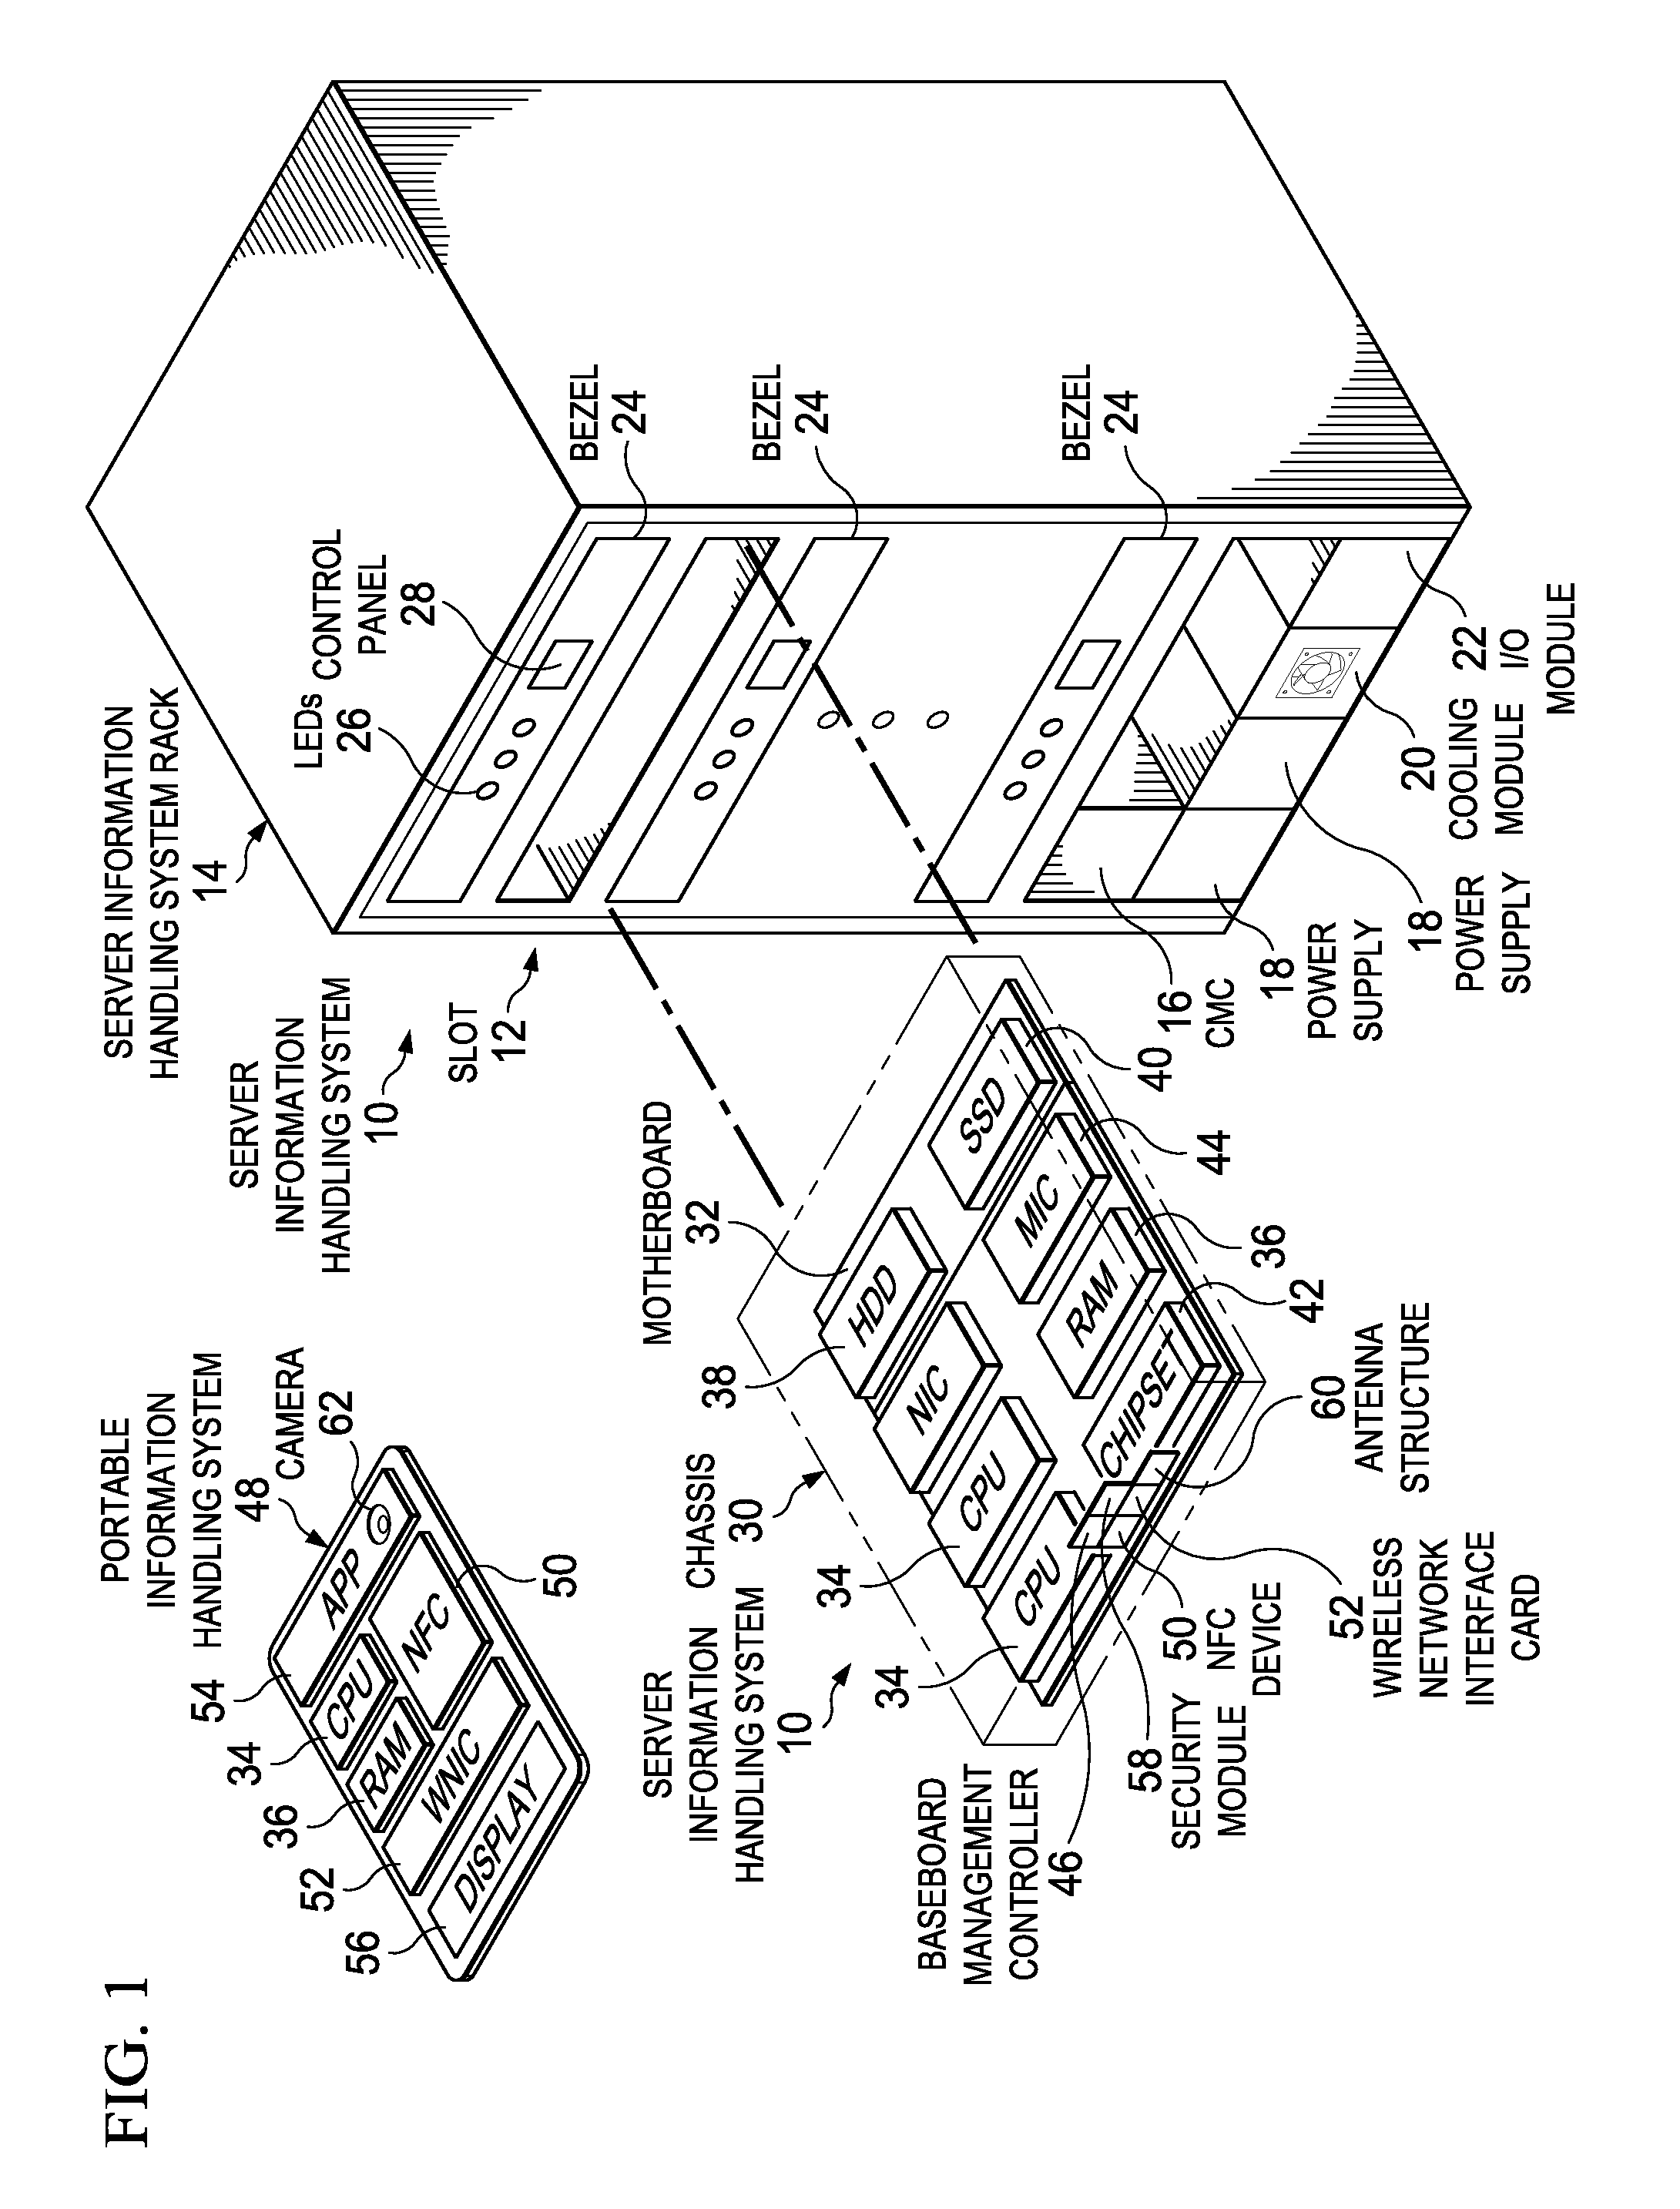 Information handling system secure RF wireless communication management with out-of-band encryption information handshake